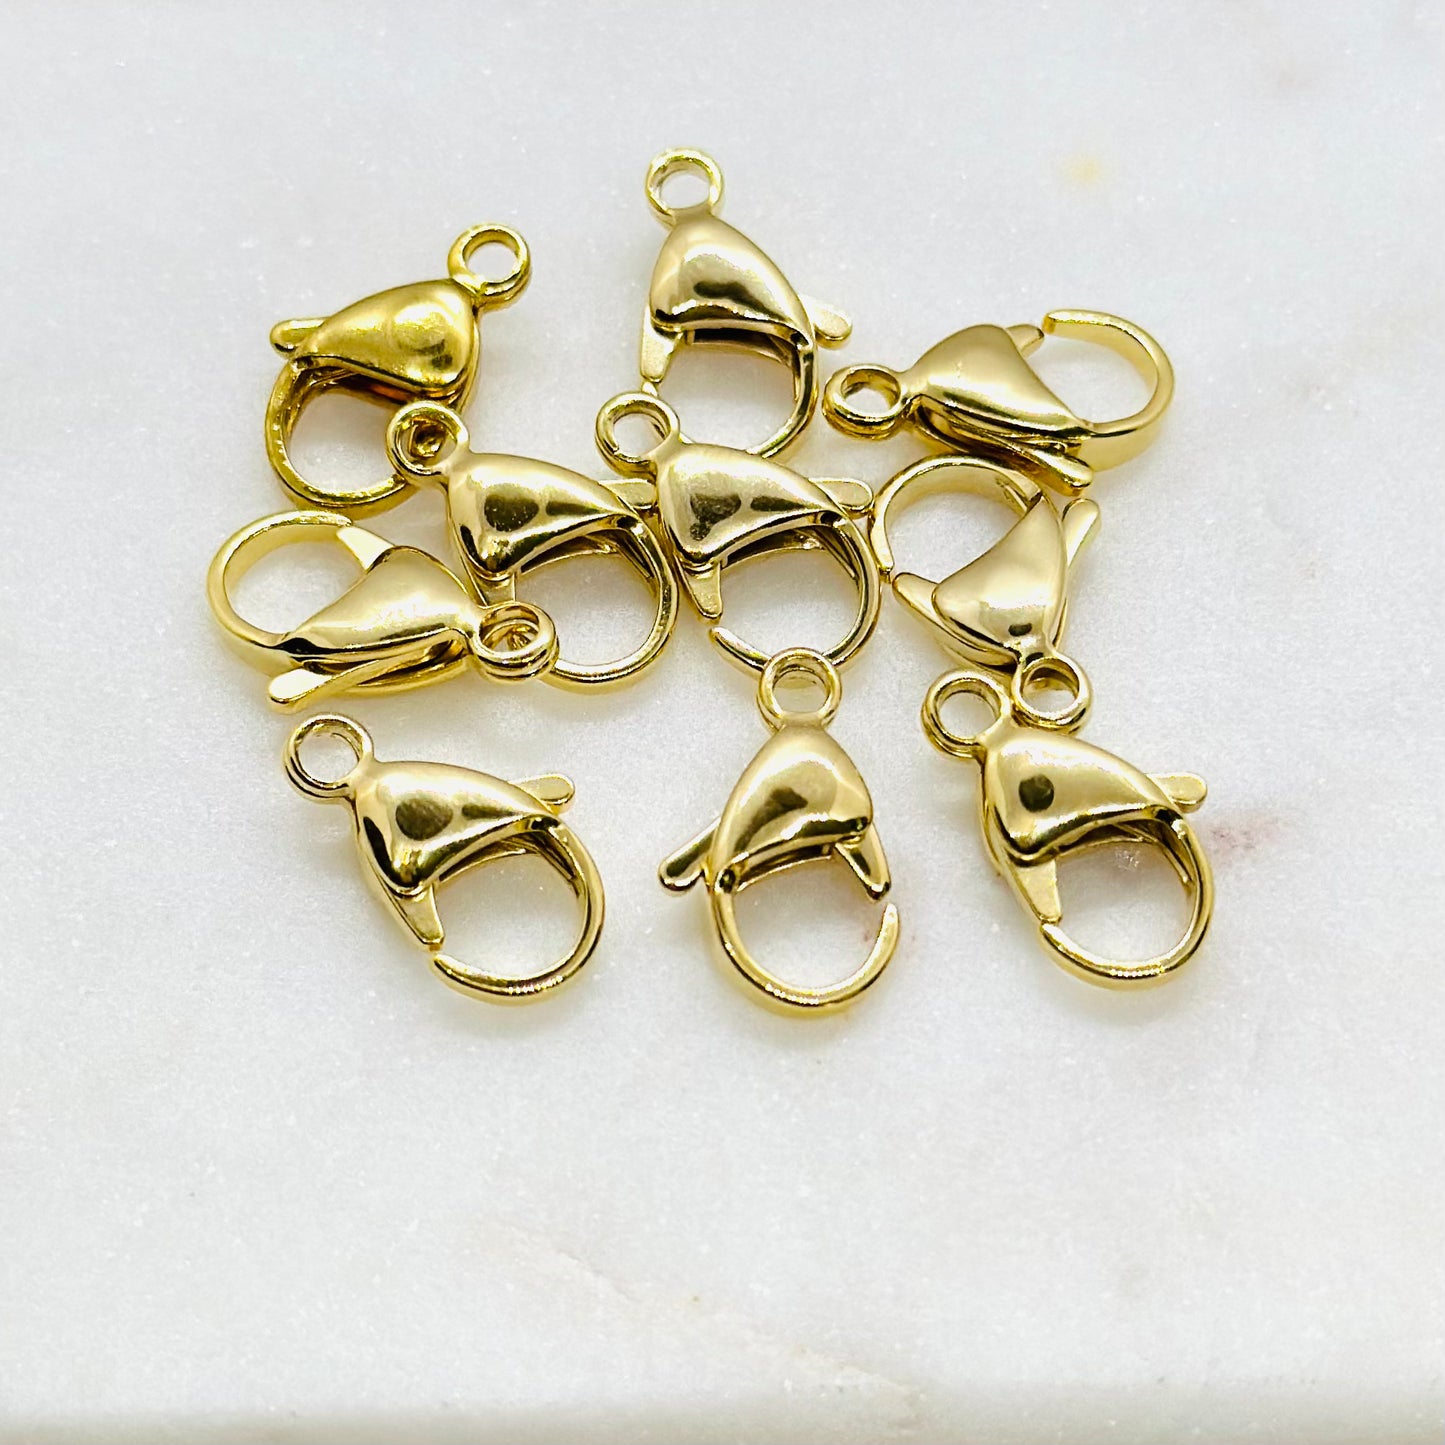 Lobster Claw Clasps (10pcs)